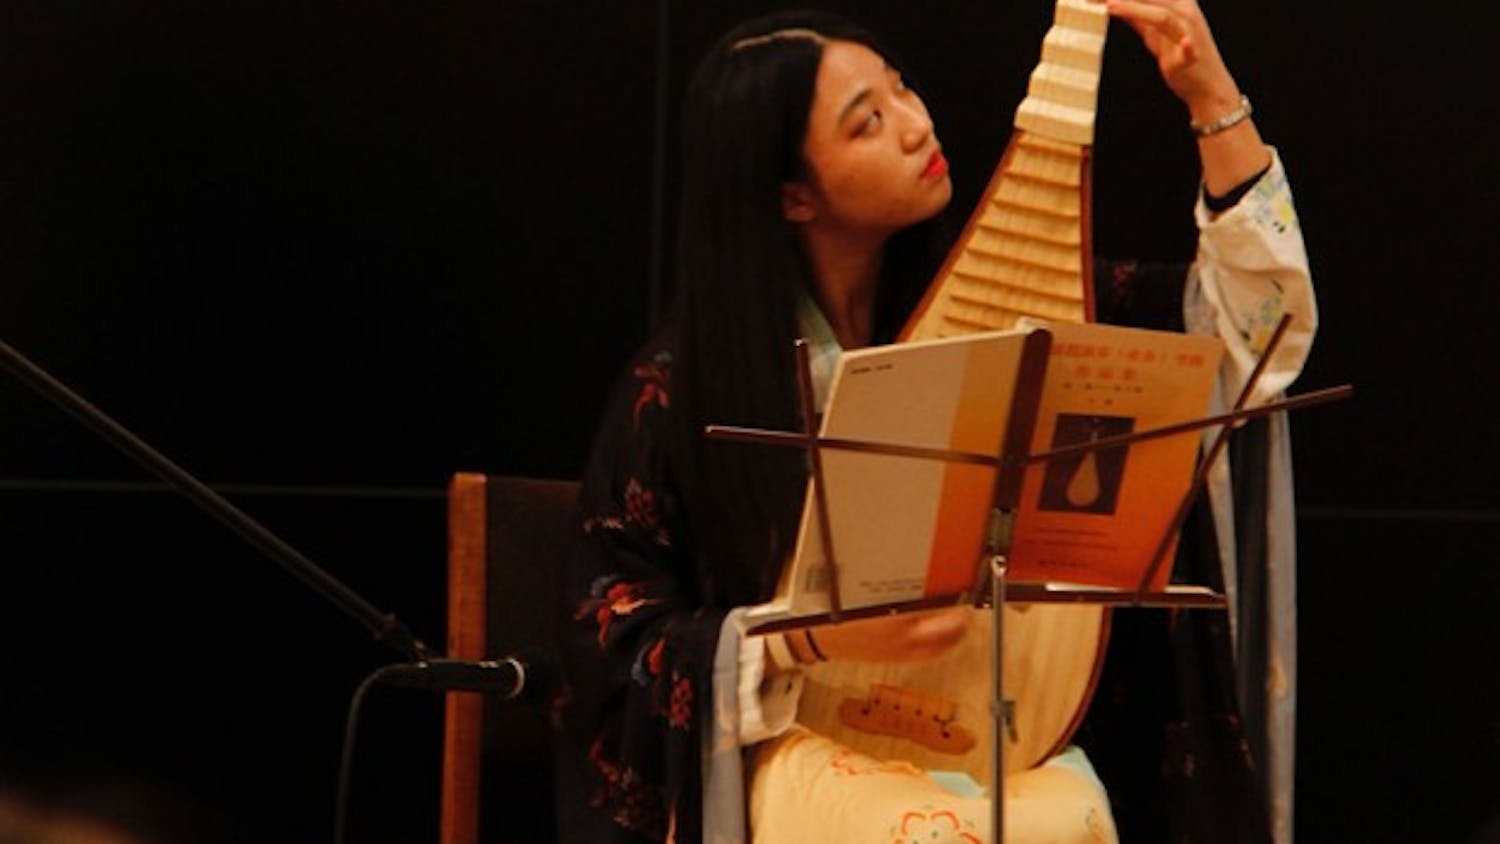 Sophomore&nbsp;Zixuan Wang, vice president of public relations for the Chinese Calligraphy Club,&nbsp;plays the traditional pipa instrument as an introduction to the&nbsp;exhibition "Quilts of Southwest China" in the Mathers Museum.&nbsp;&nbsp;